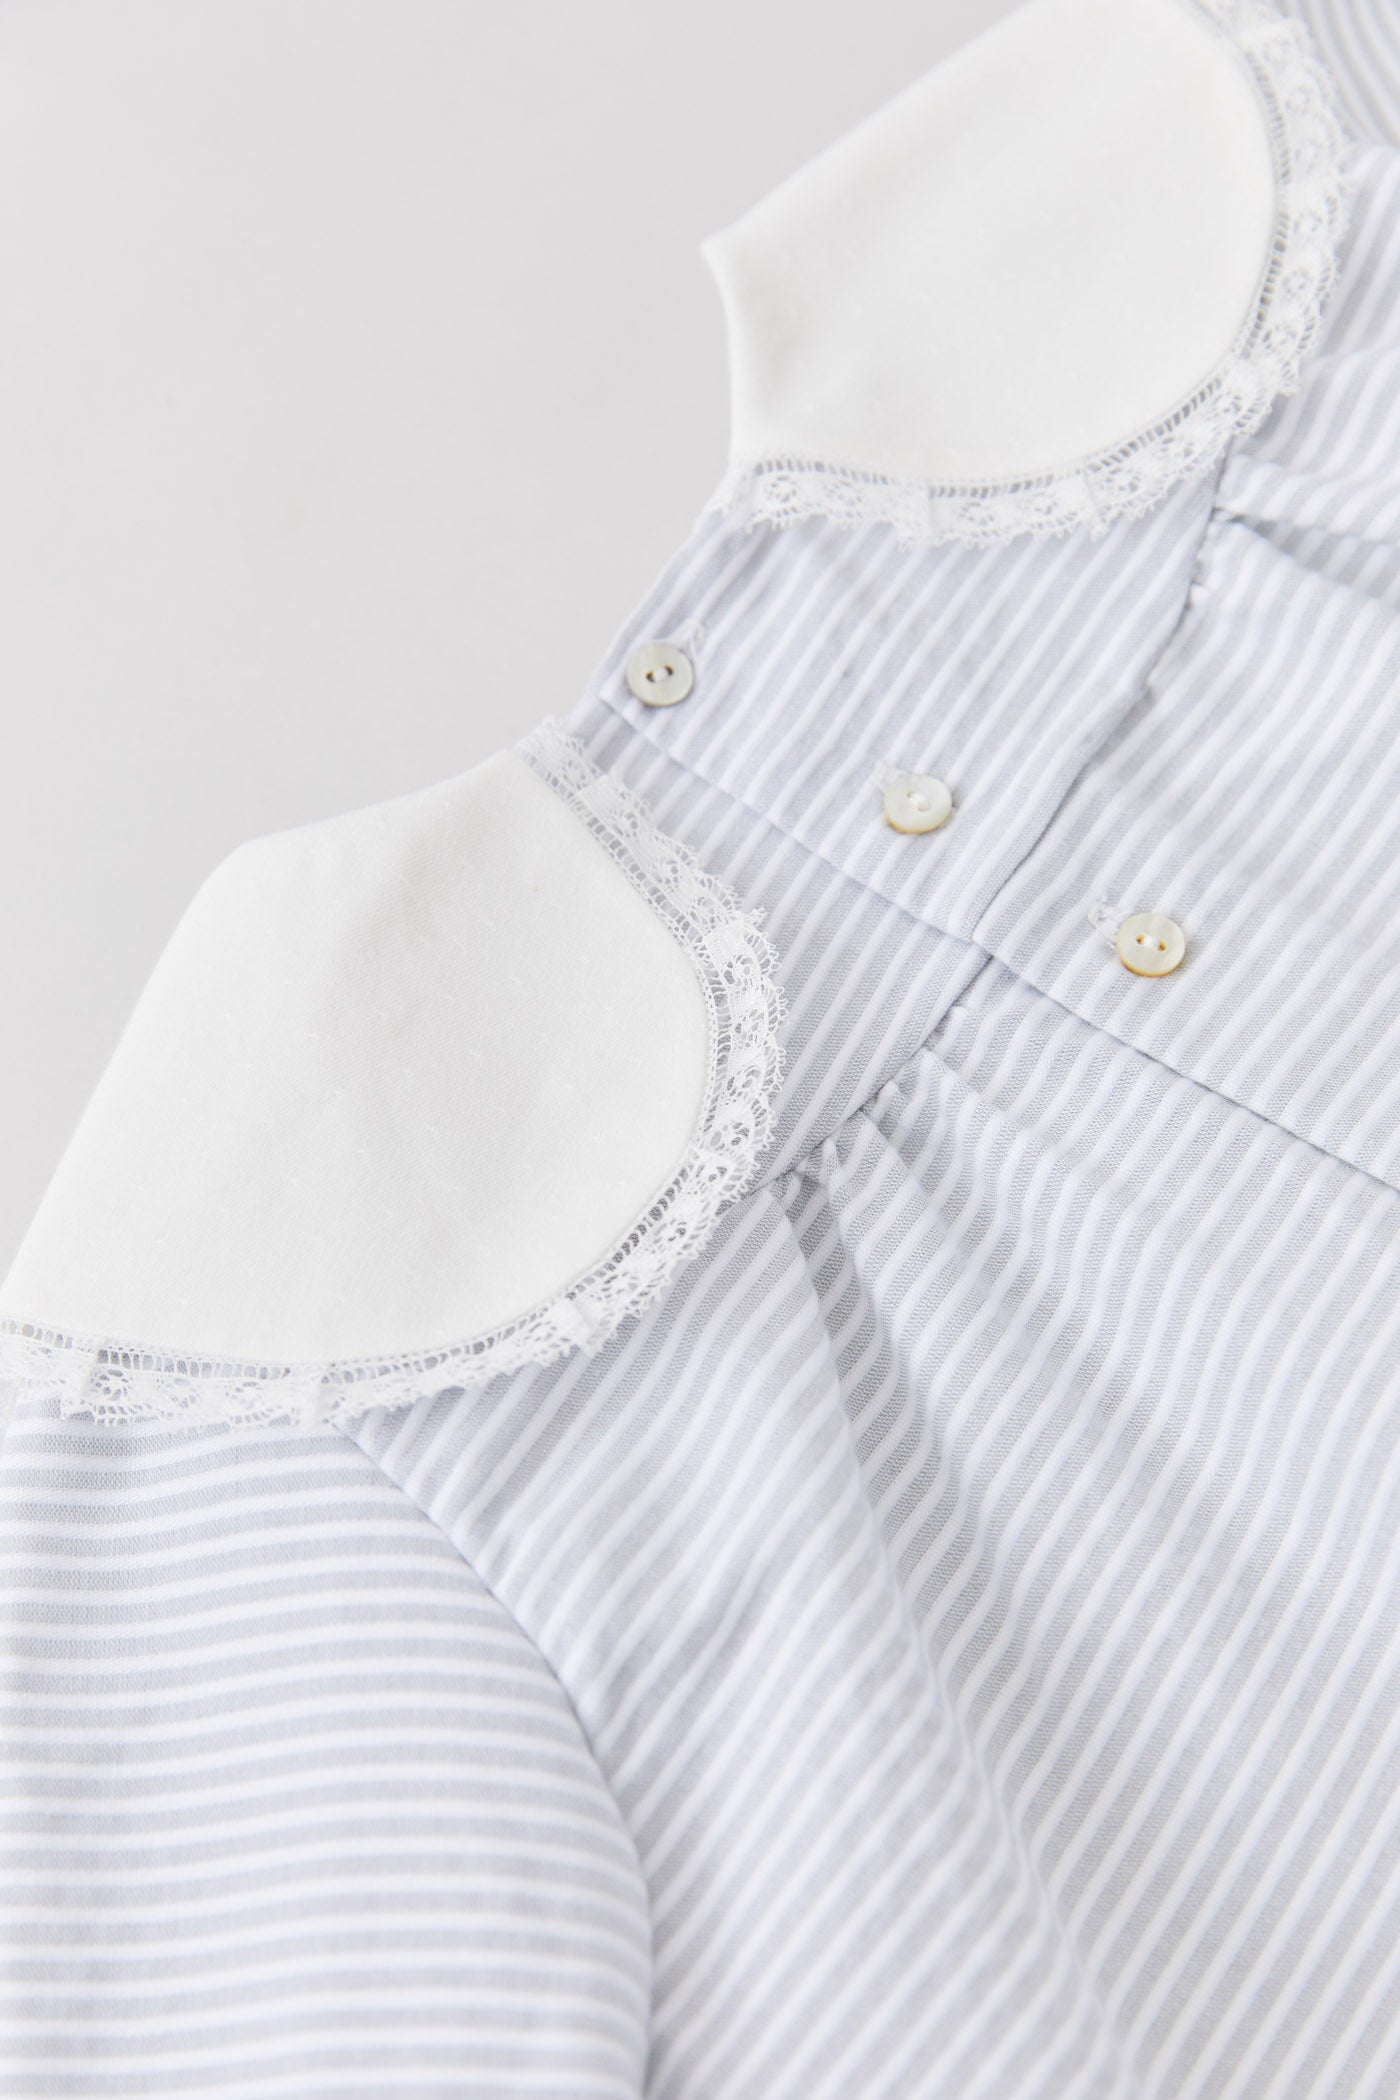 Bubble Dress Long Sleeve in Grey Stripes - Designed by Ingrid Lewis - Strawberries & Cream